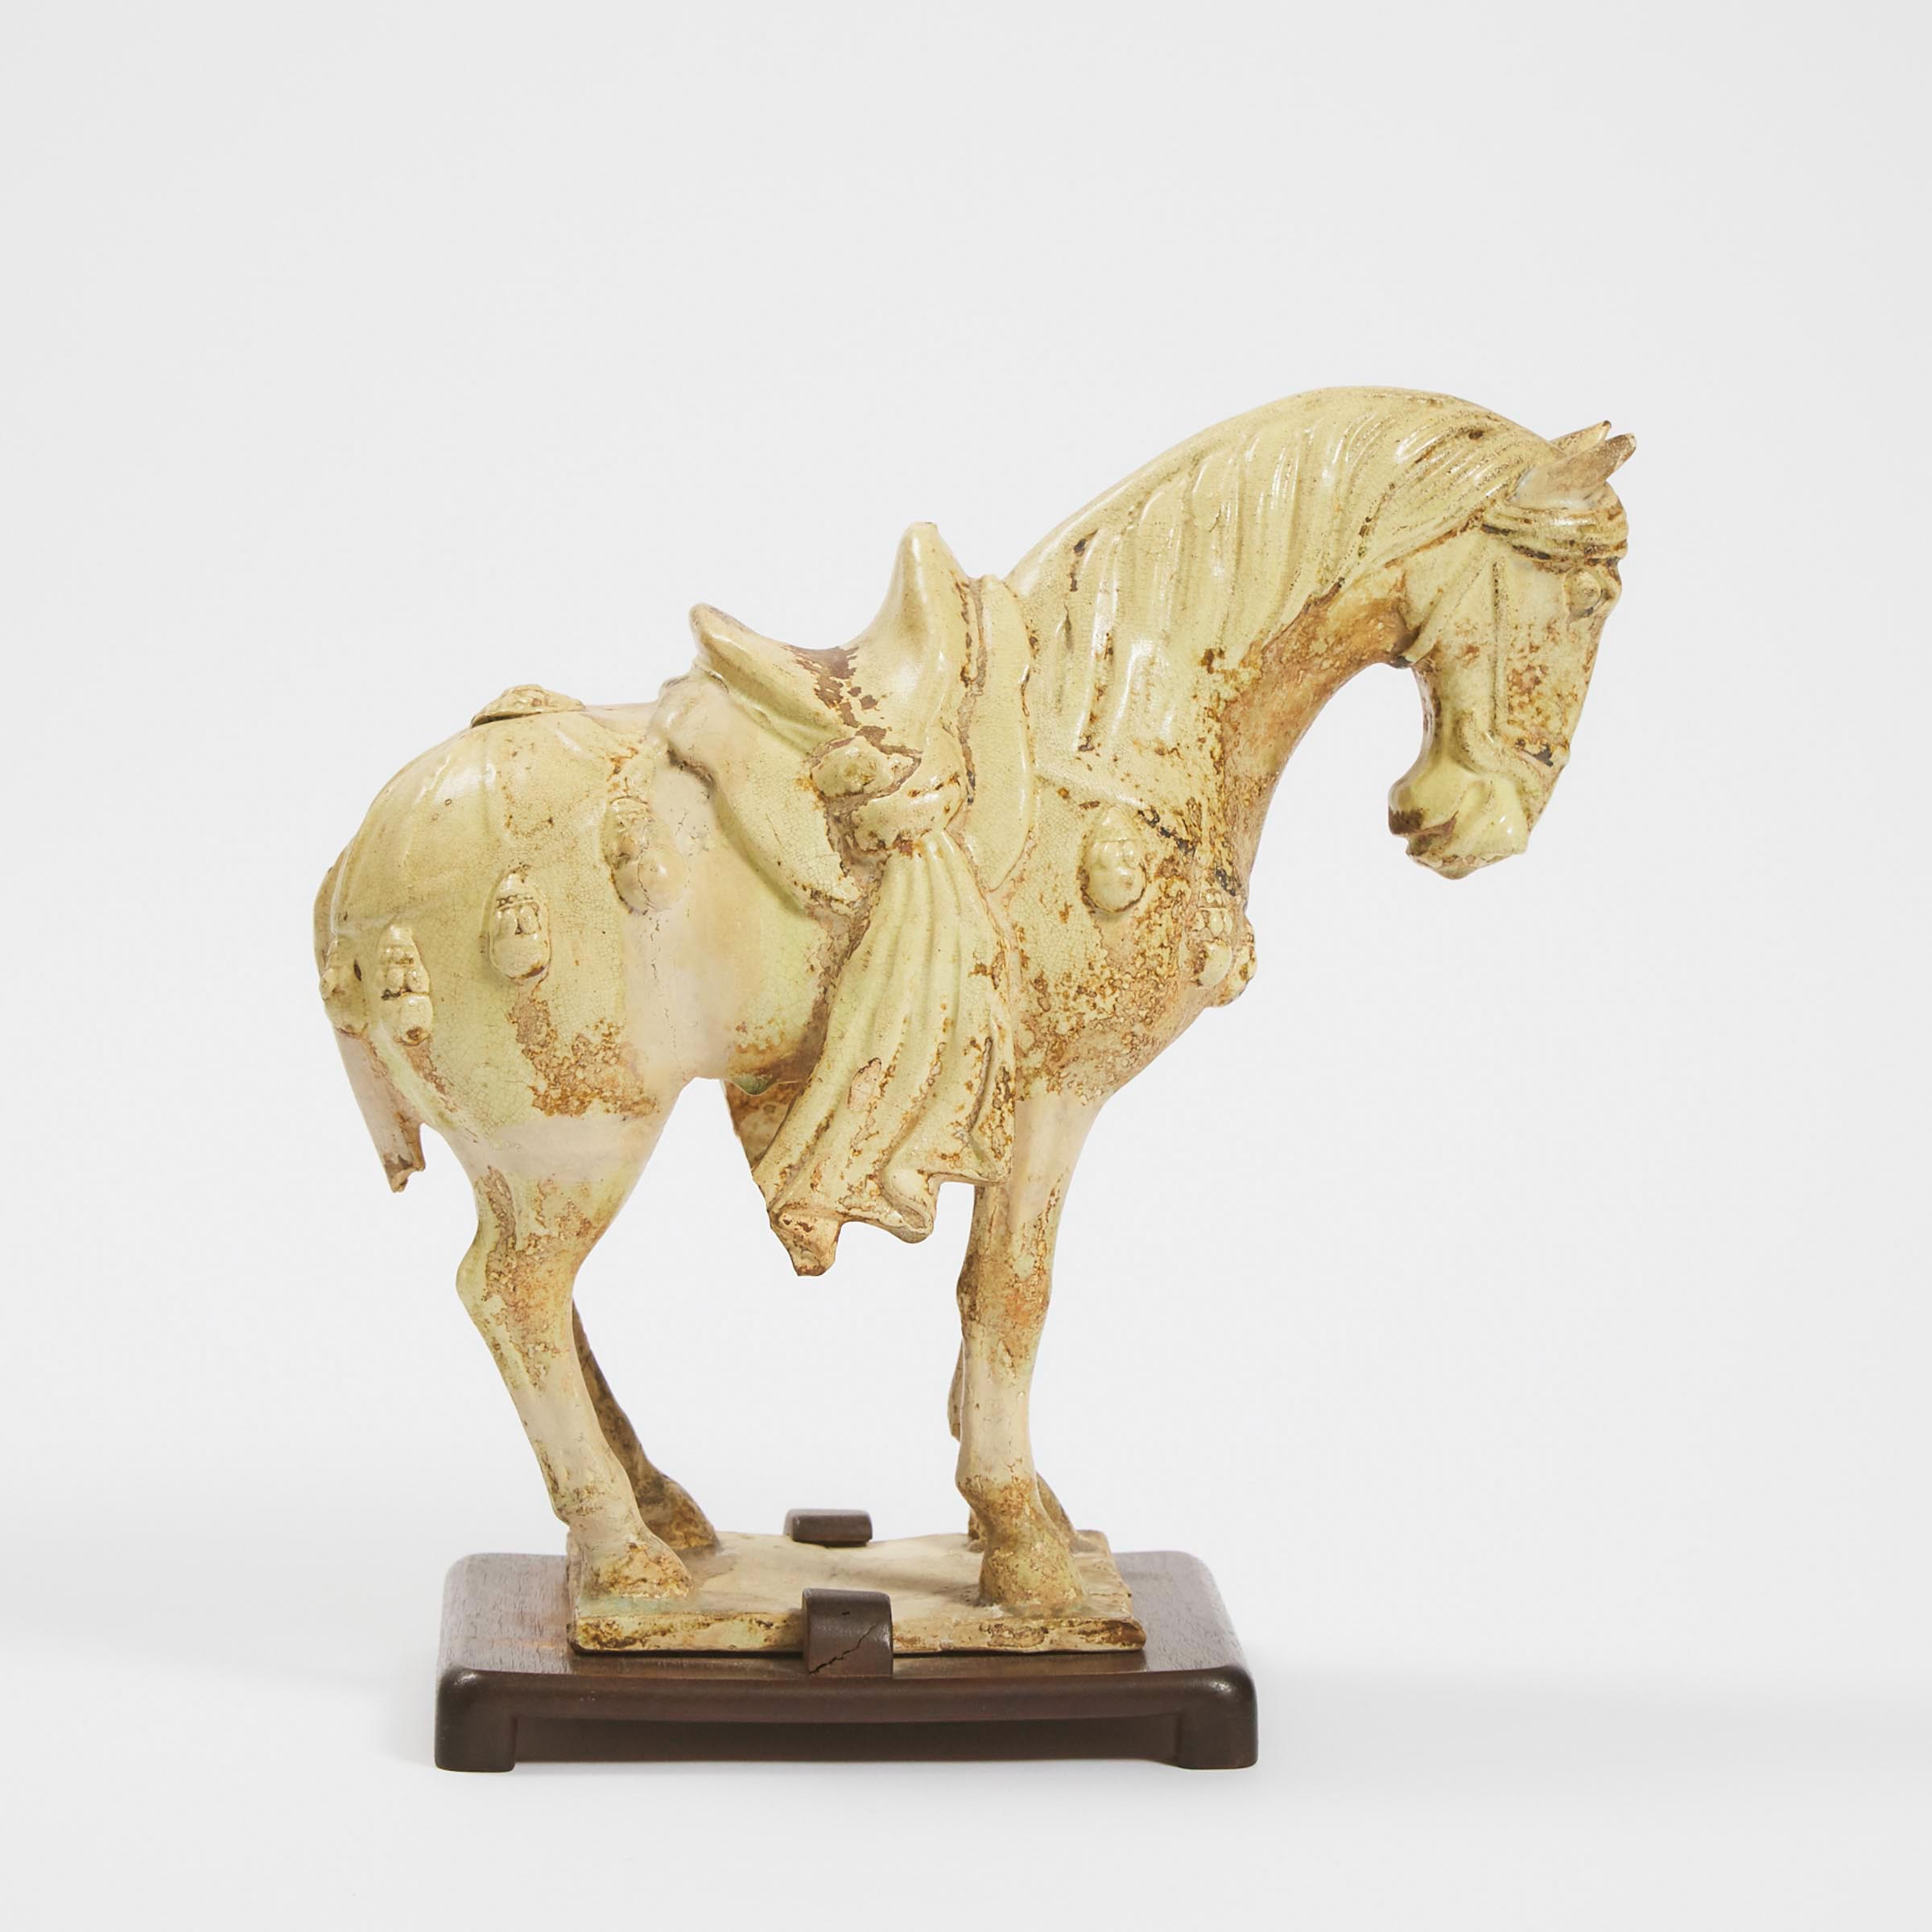 A Straw-Glazed Pottery Caparisoned Horse, Sui/Tang Dynasty